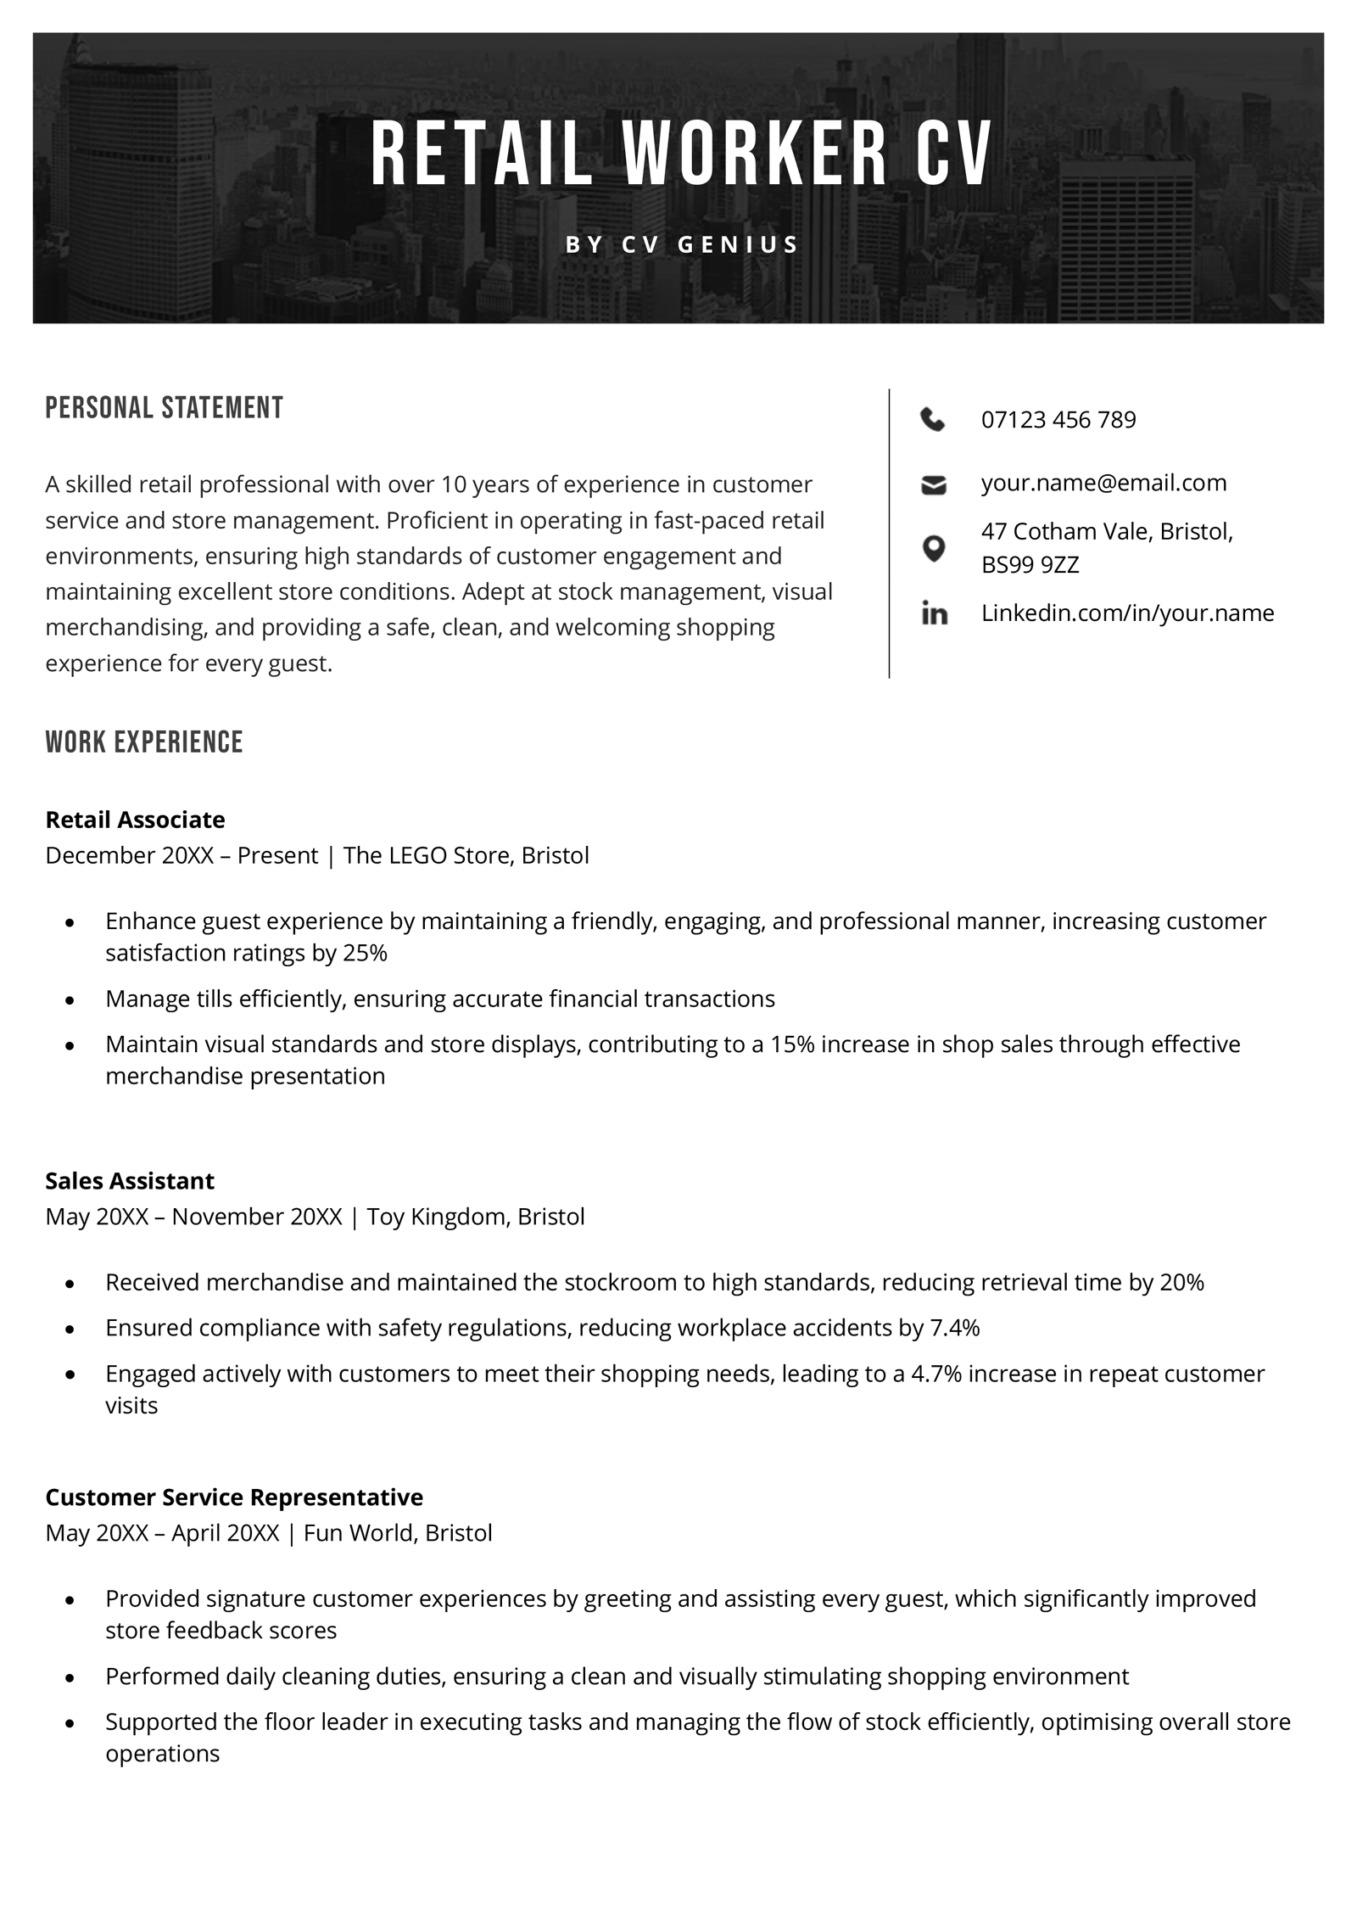 A retail worker CV example that uses a big bold header to attract the attention of recruiting managers.